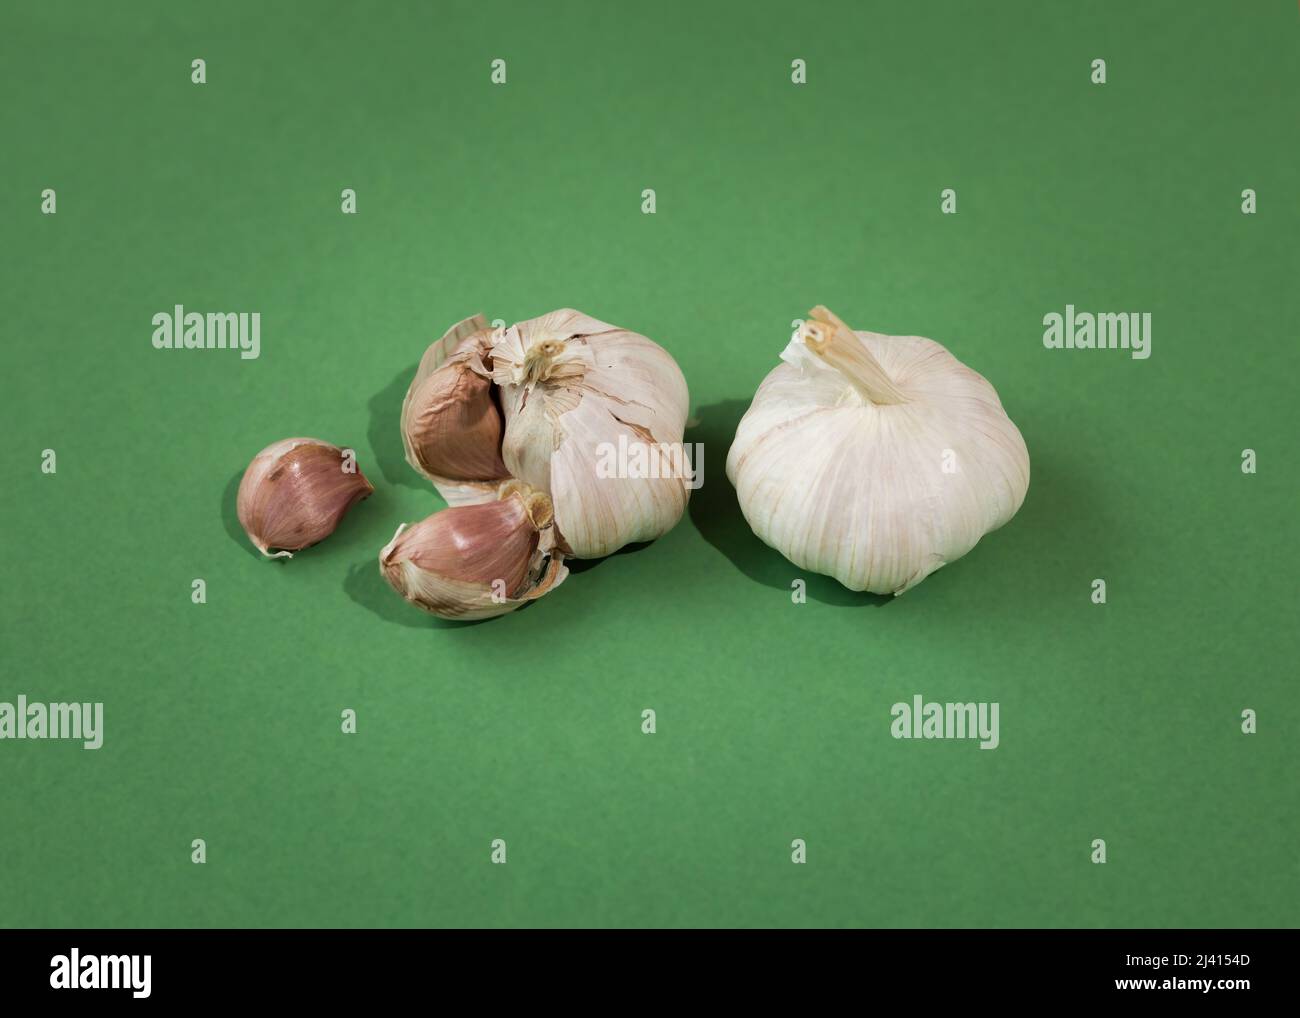 Dry whole garlic bulb, cloves, and green foxes of young garlic on